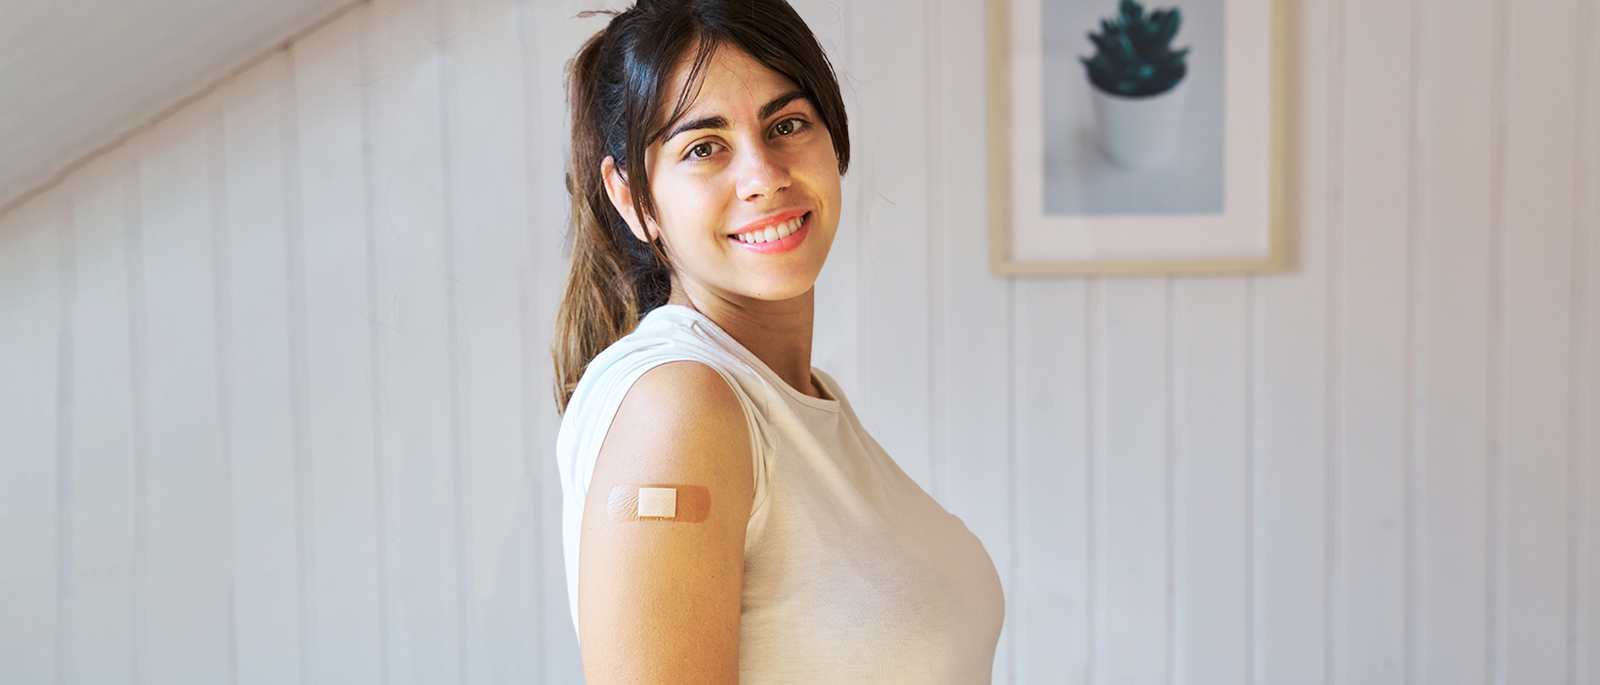 Woman with small bandage on arm.